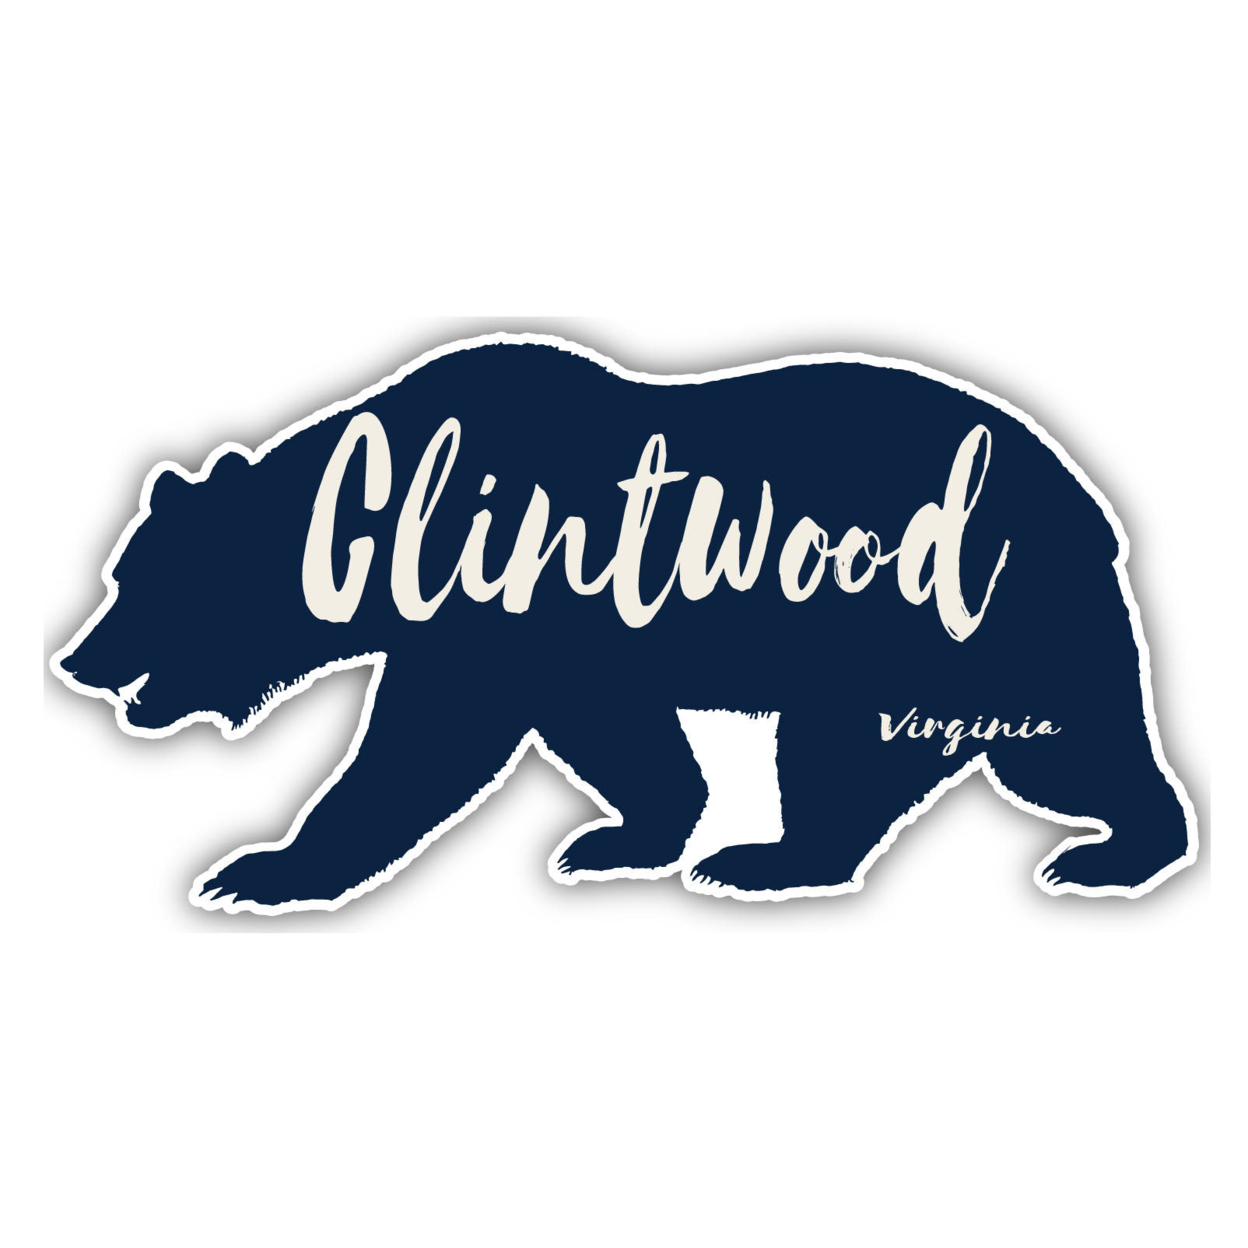 Clintwood Virginia Souvenir Decorative Stickers (Choose Theme And Size) - 4-Pack, 2-Inch, Bear